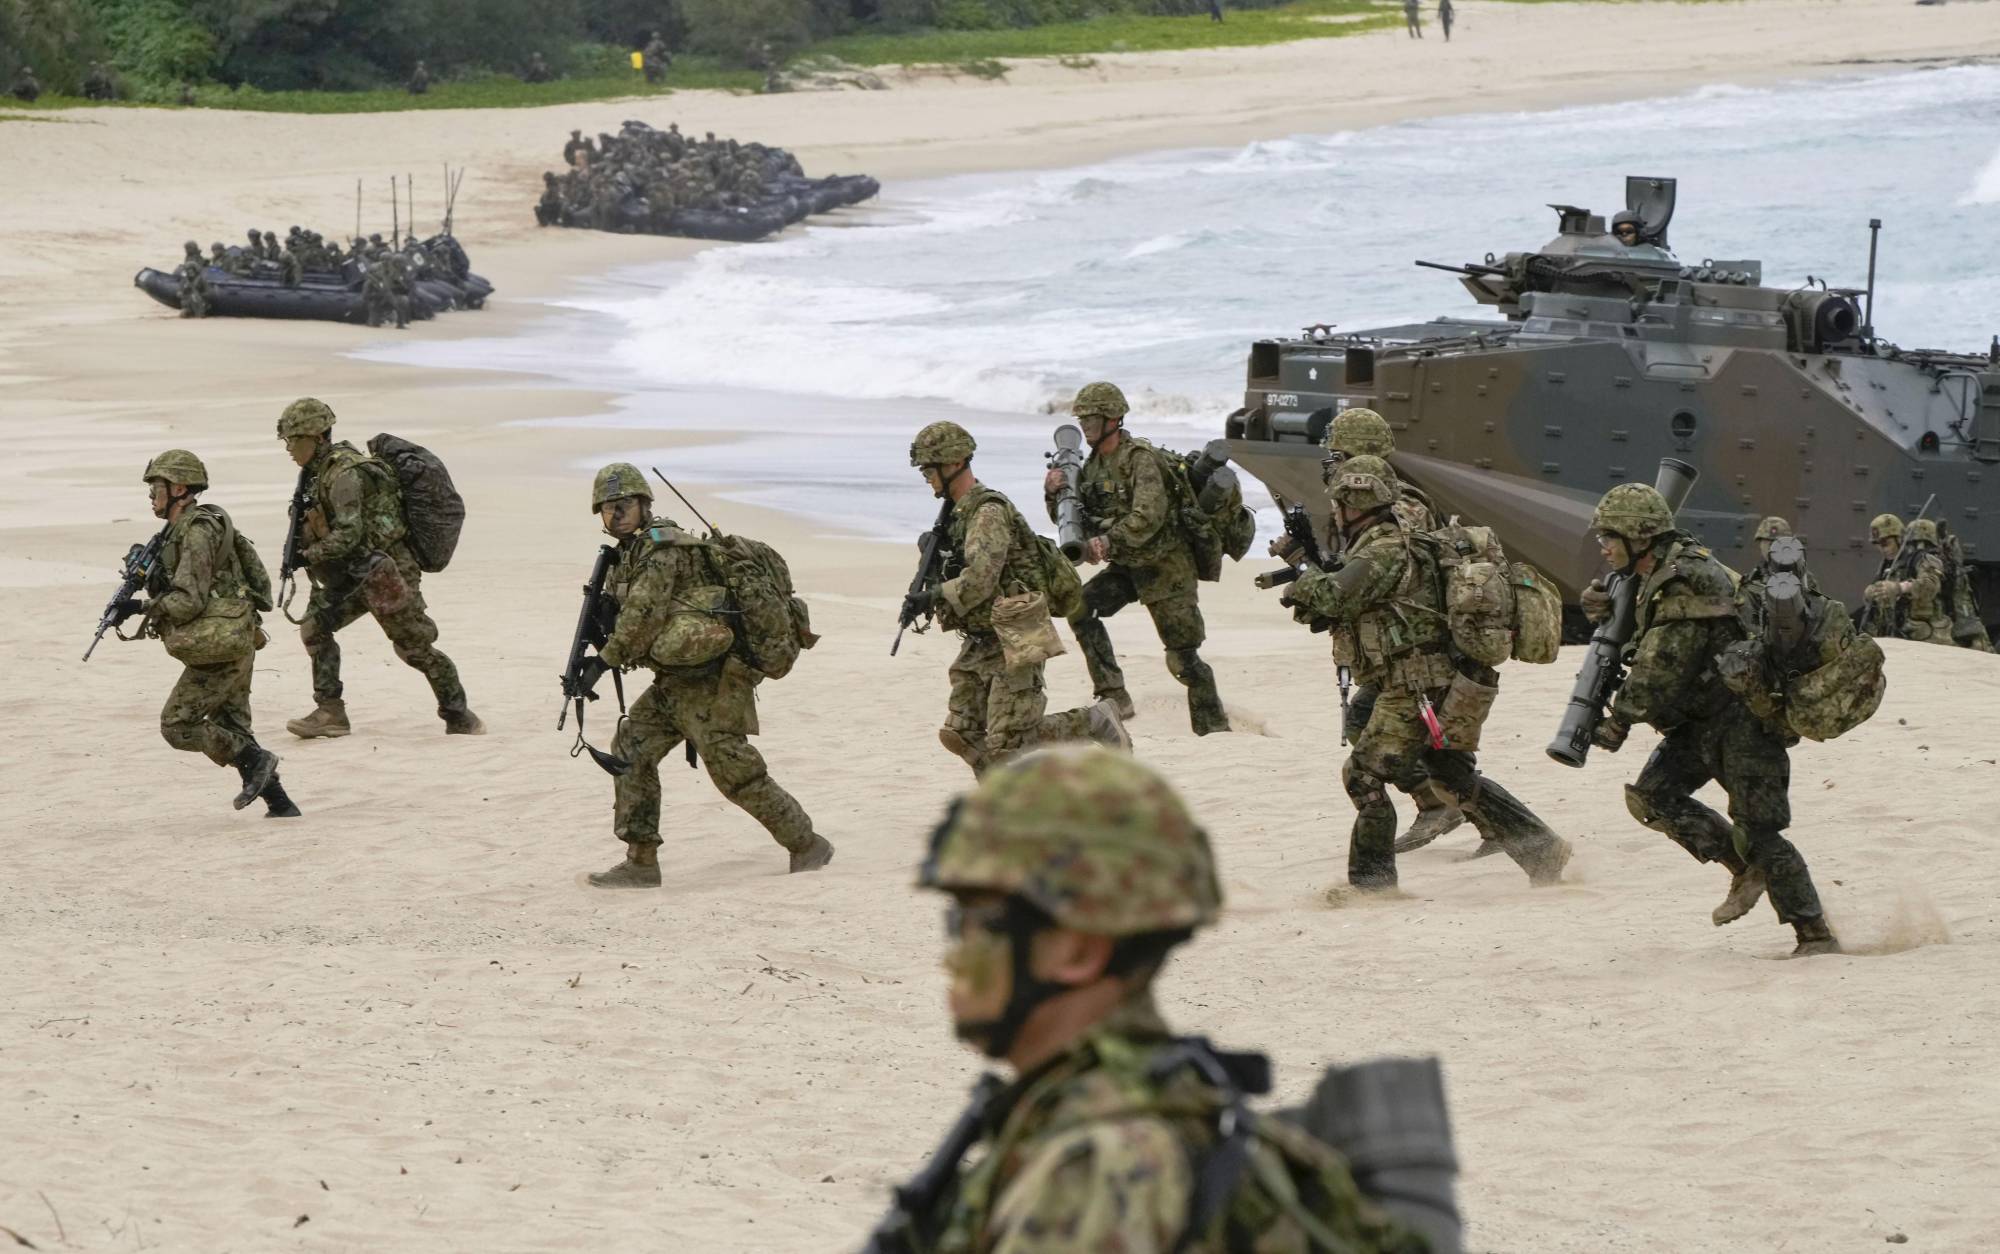 Ground Self-Defense Force members conduct a landing drill on the island of Tokunoshima in Kagoshima Prefecture on Friday as part of the Iron Fist joint exercise with the U.S. Marines. | KYODO